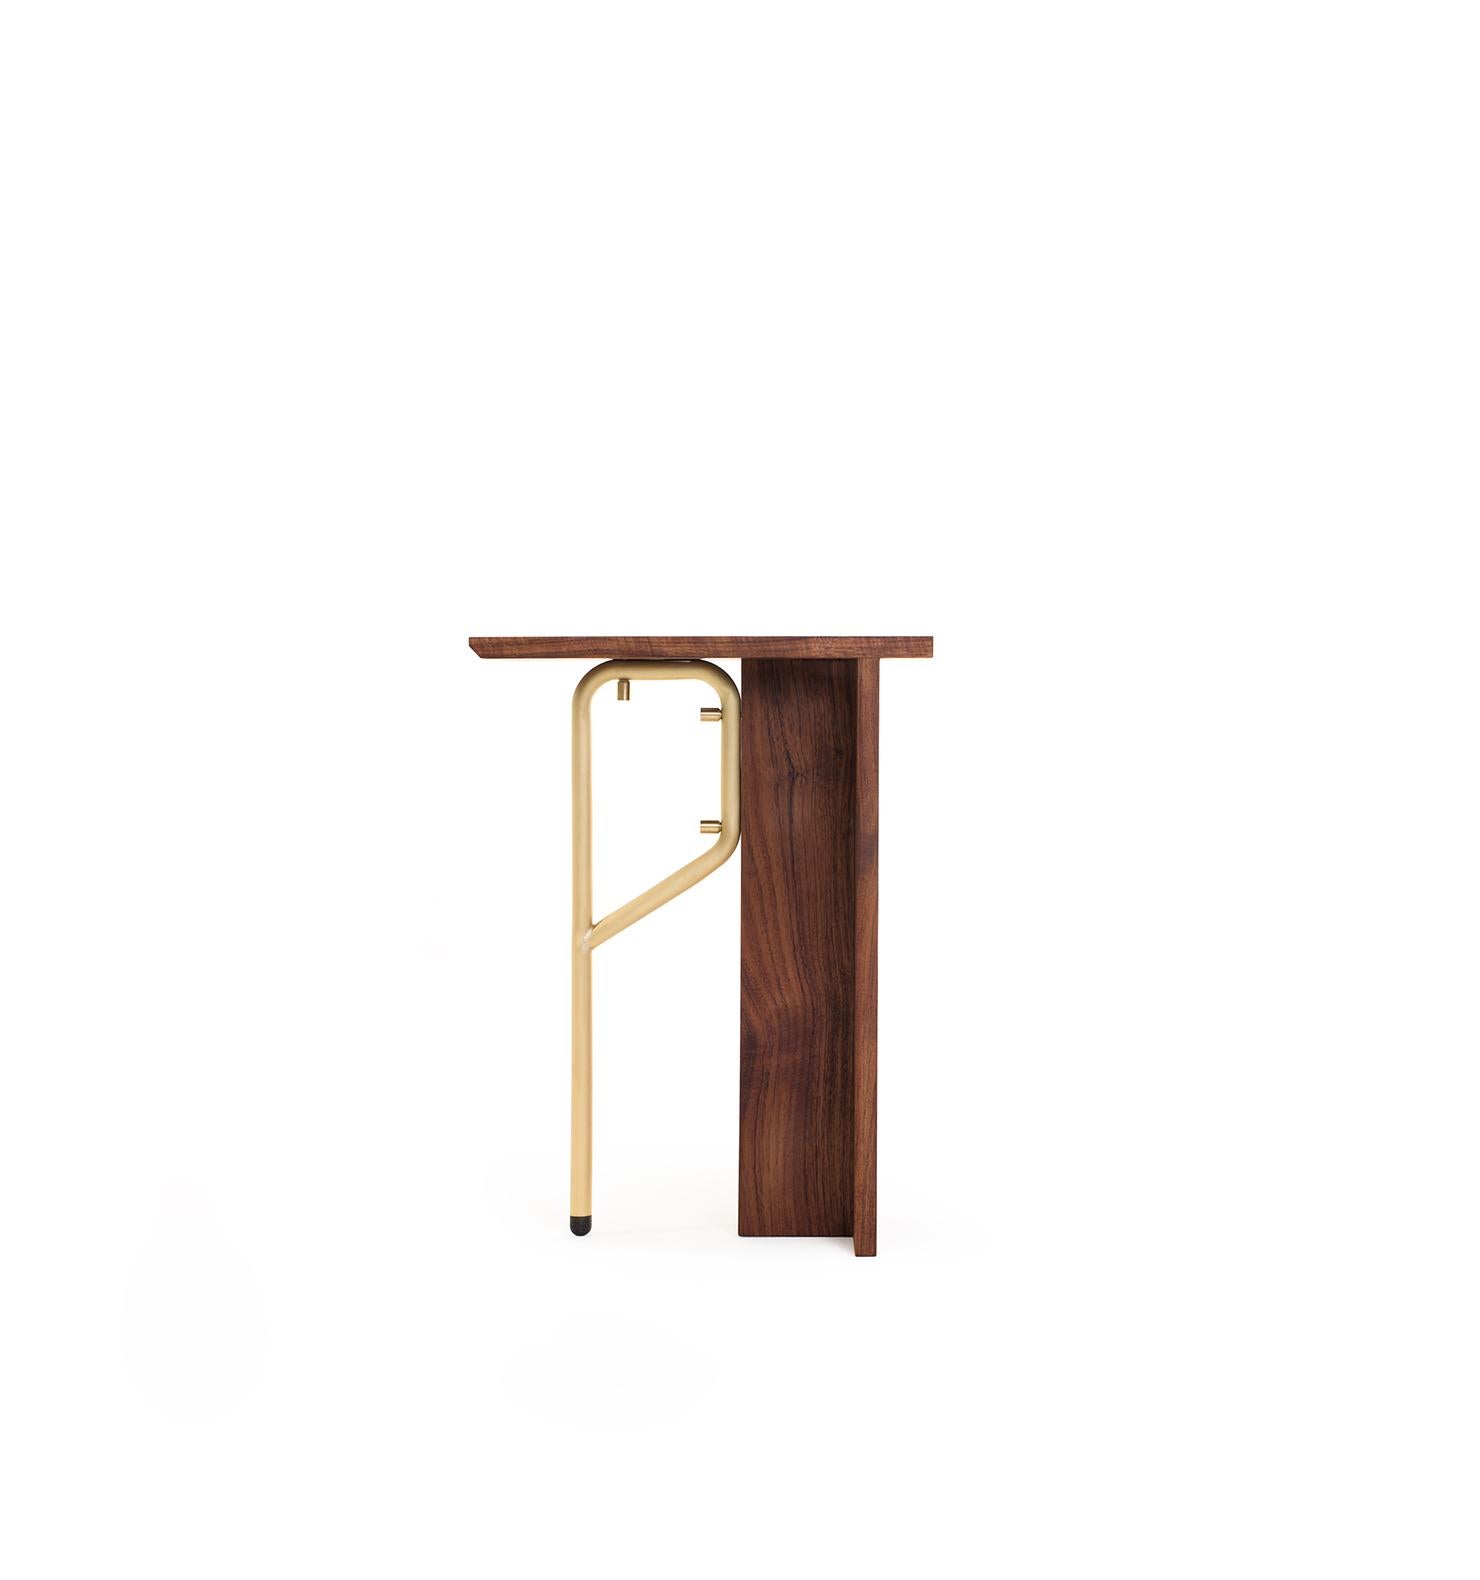 
The perfect complement to the DUNA triad, the DUNA Side Table is a testament to thoughtful design and functionality. With two intersecting surfaces and a small trace of metal, this table adds shape and structure to the ensemble.

Specifically